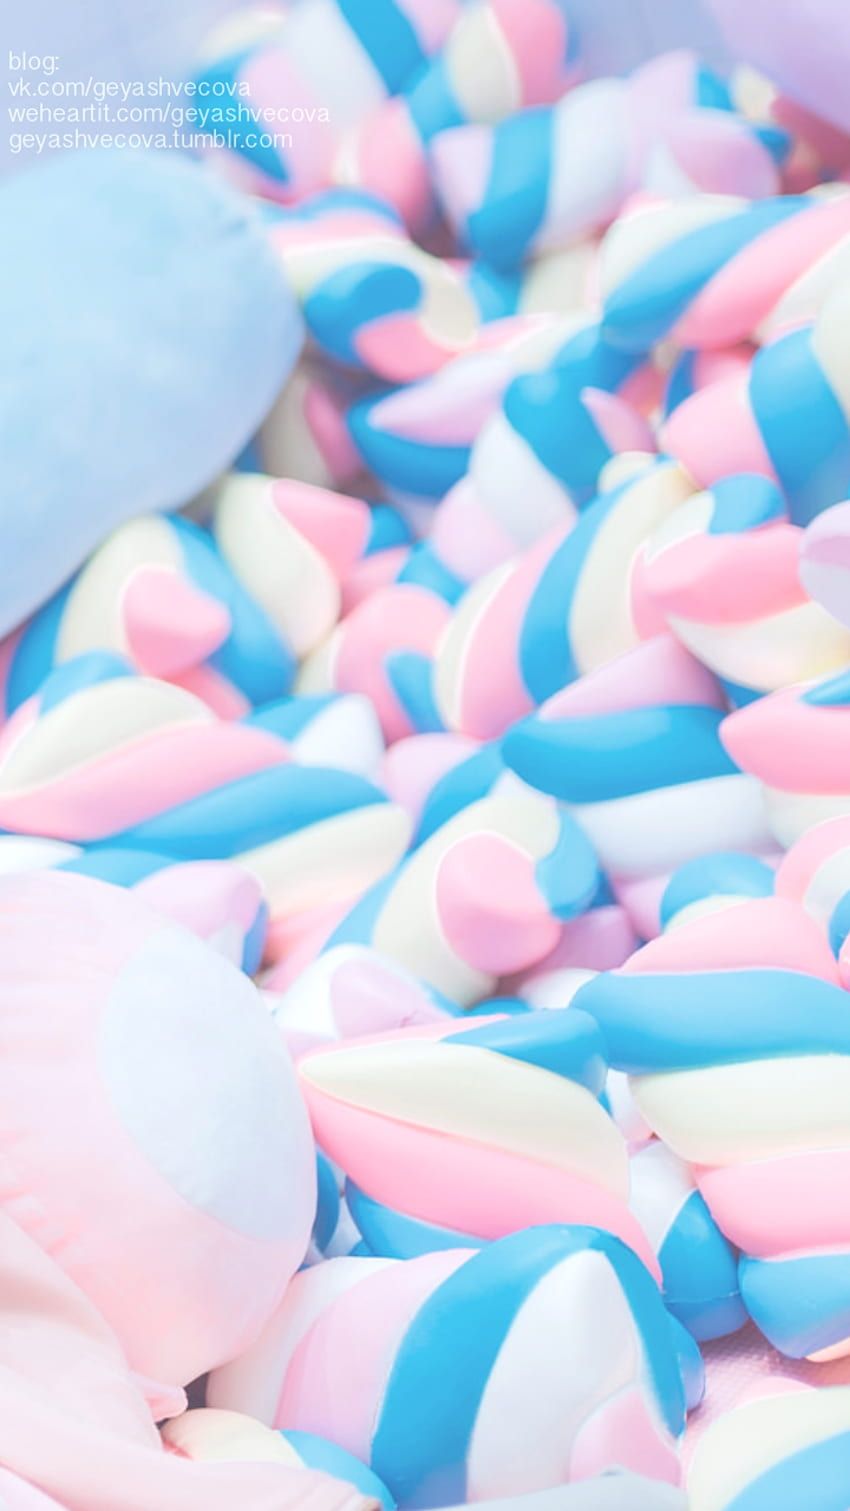 Marshmallows in a pile with blue, pink and white colors - Marshmallows